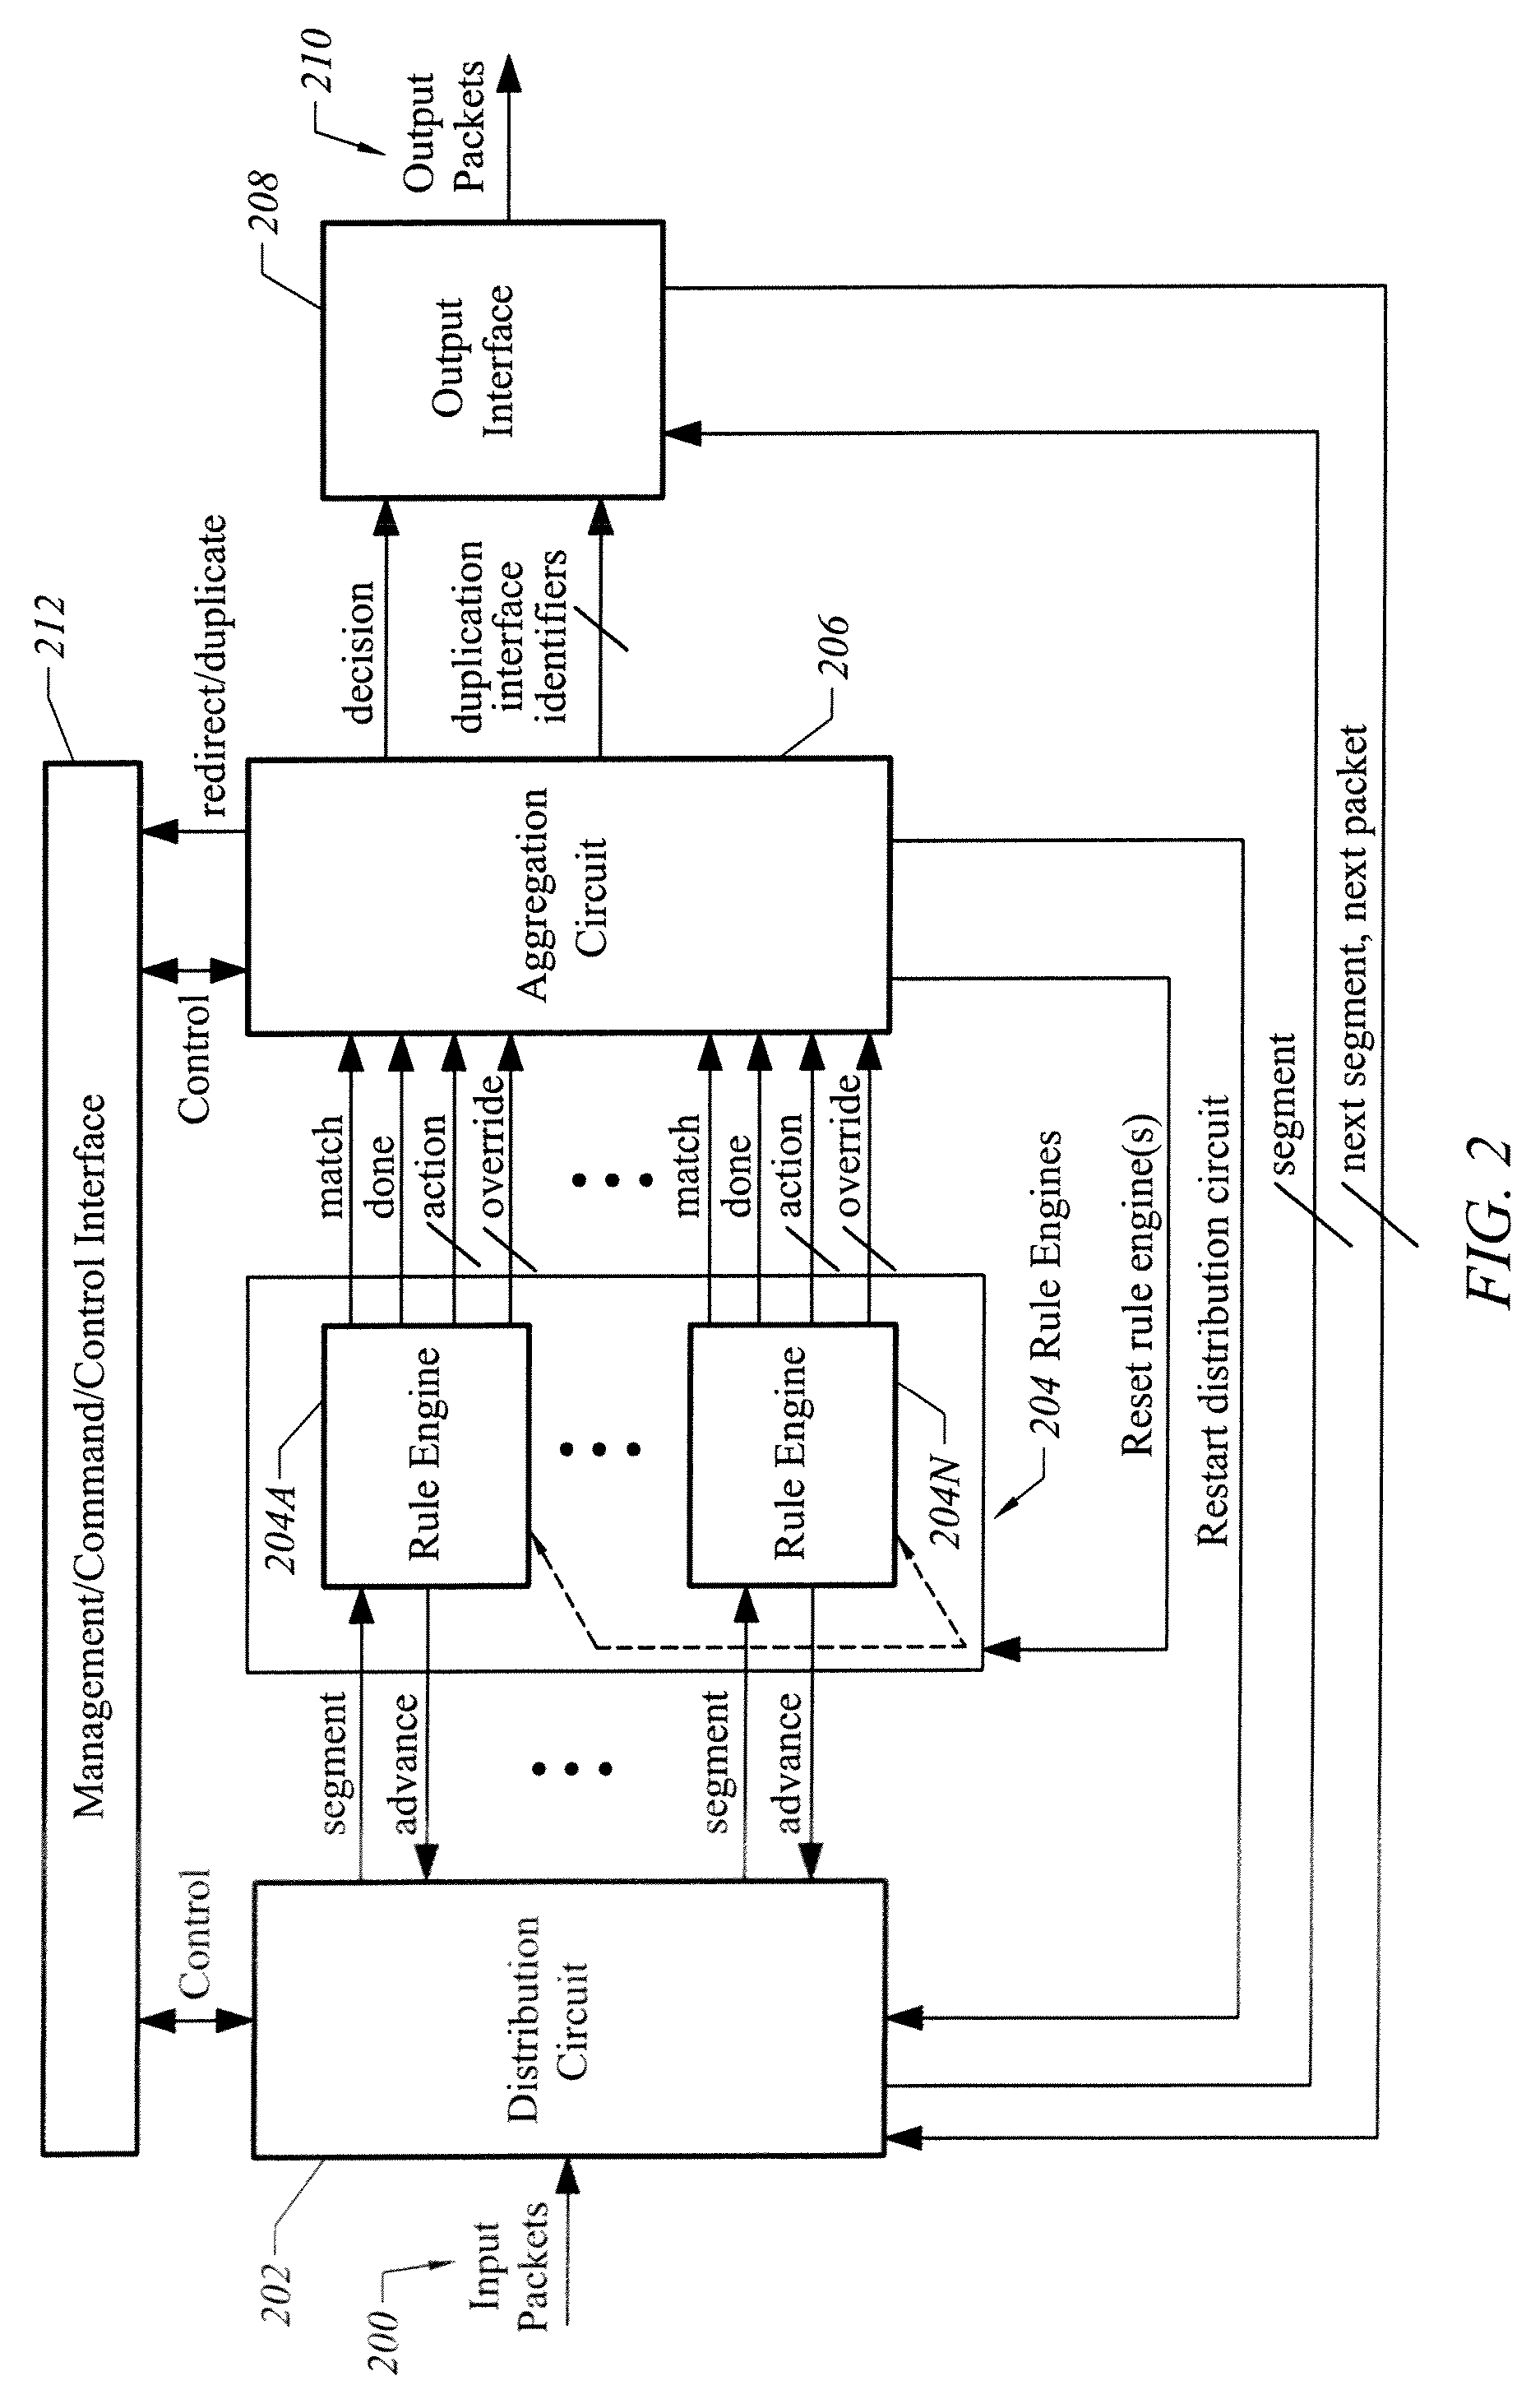 Apparatus and method for providing security and monitoring in a networking architecture